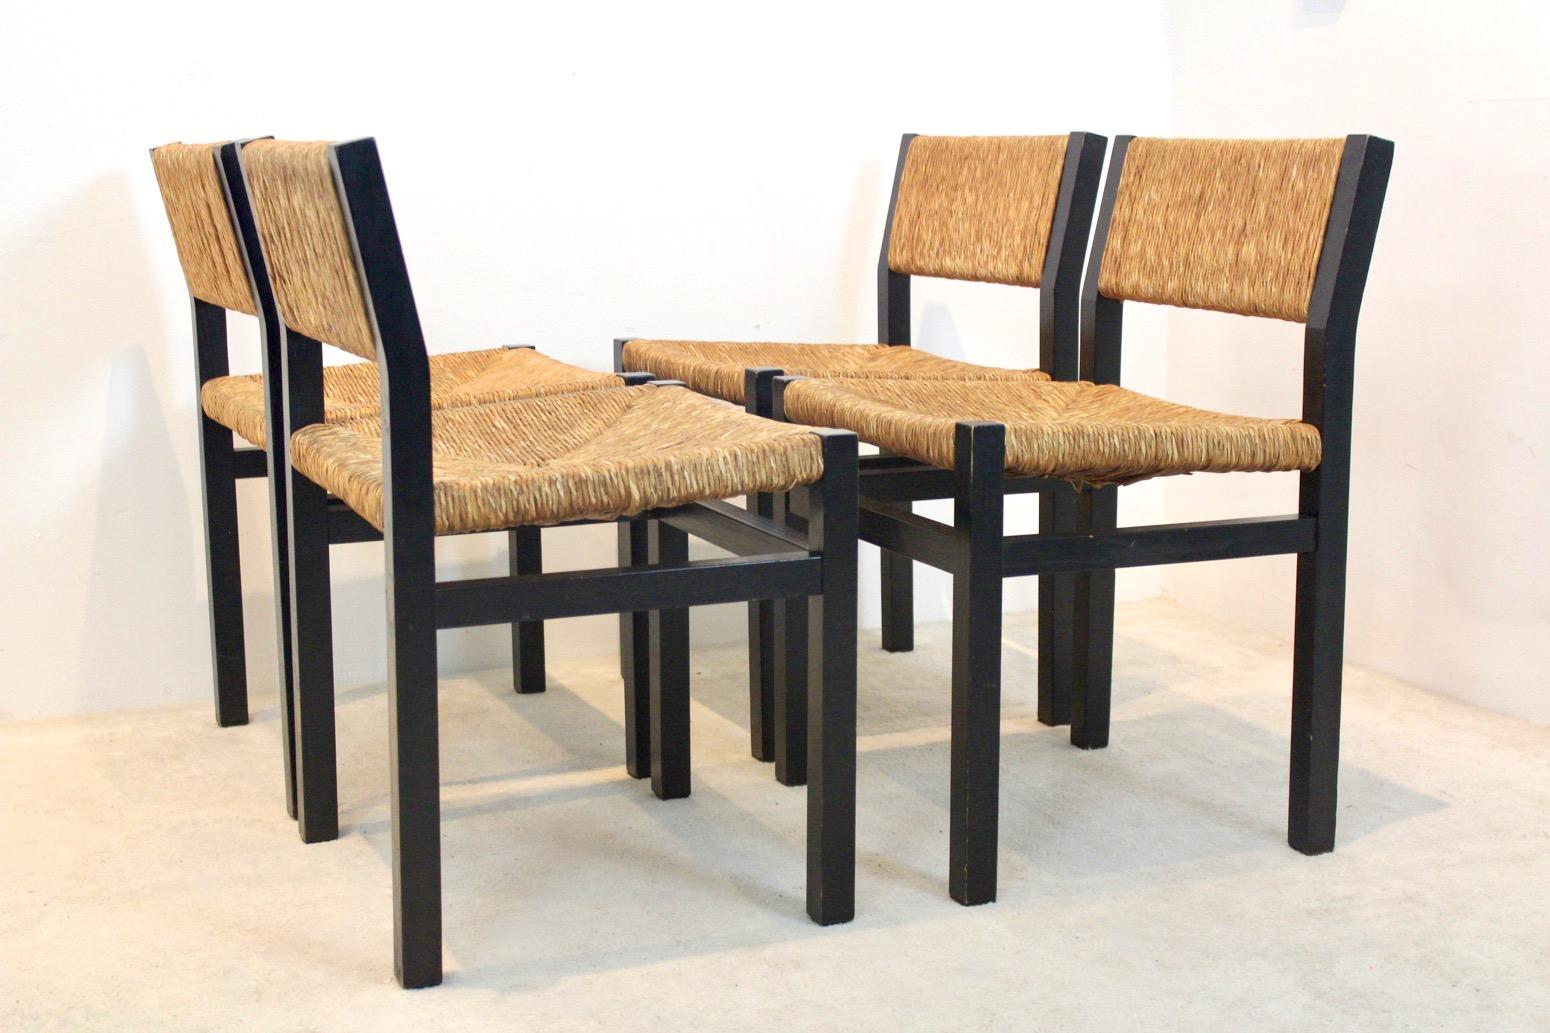 Characteristic chair designed by Martin Visser in the ‘60s for Spectrum Holland. The frames of the chairs are made of black Ash and upholstered with Papercord. We have 4 in Black ash and 6 in oak Wenge color. Total of 10 chairs. The chairs are used